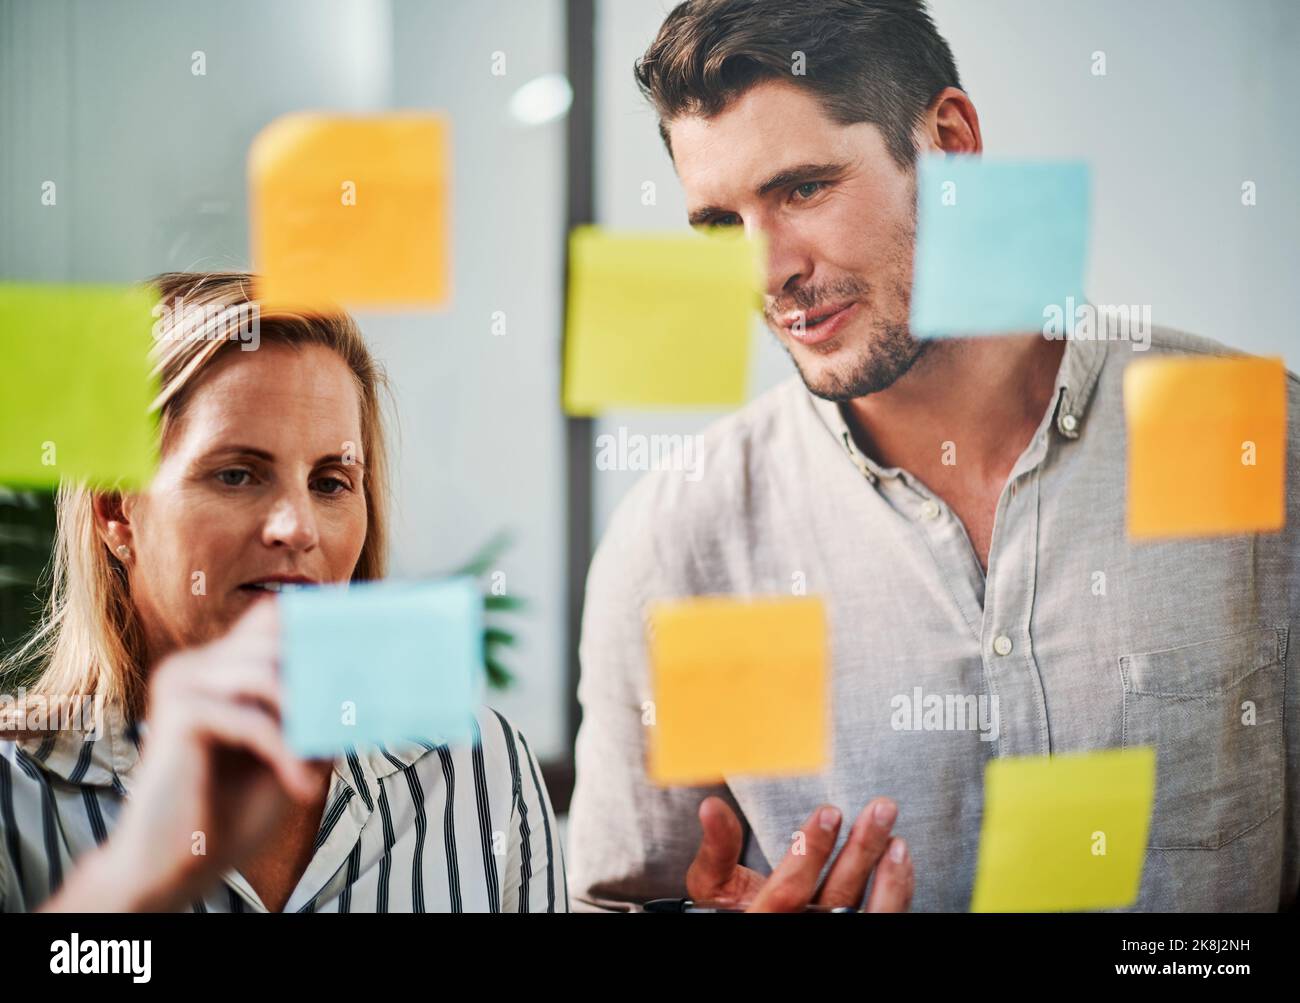 There are many ways to achieve success. two business colleagues brainstorming on a glass wipe board in their office. Stock Photo